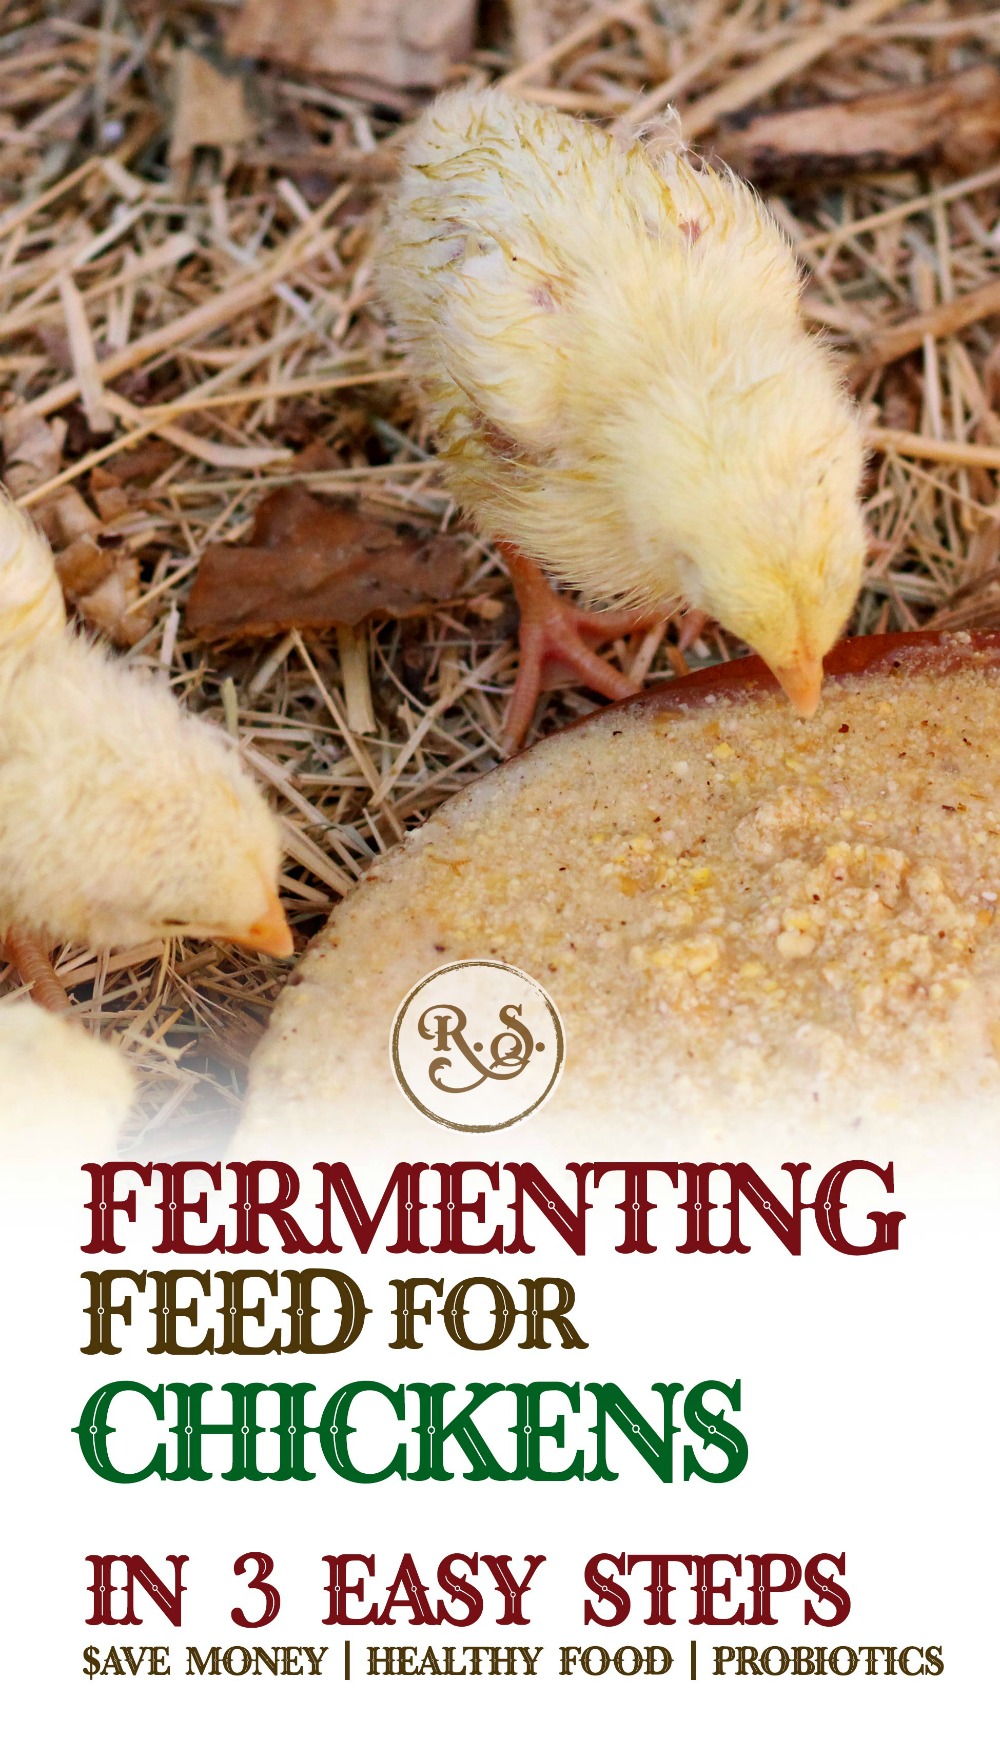 Fermenting chicken feed for your backyard chickens is a great way to save money on their food. Fermented feed can be fed for your hens, baby chicks, egg layers, broilers or meat chickens.